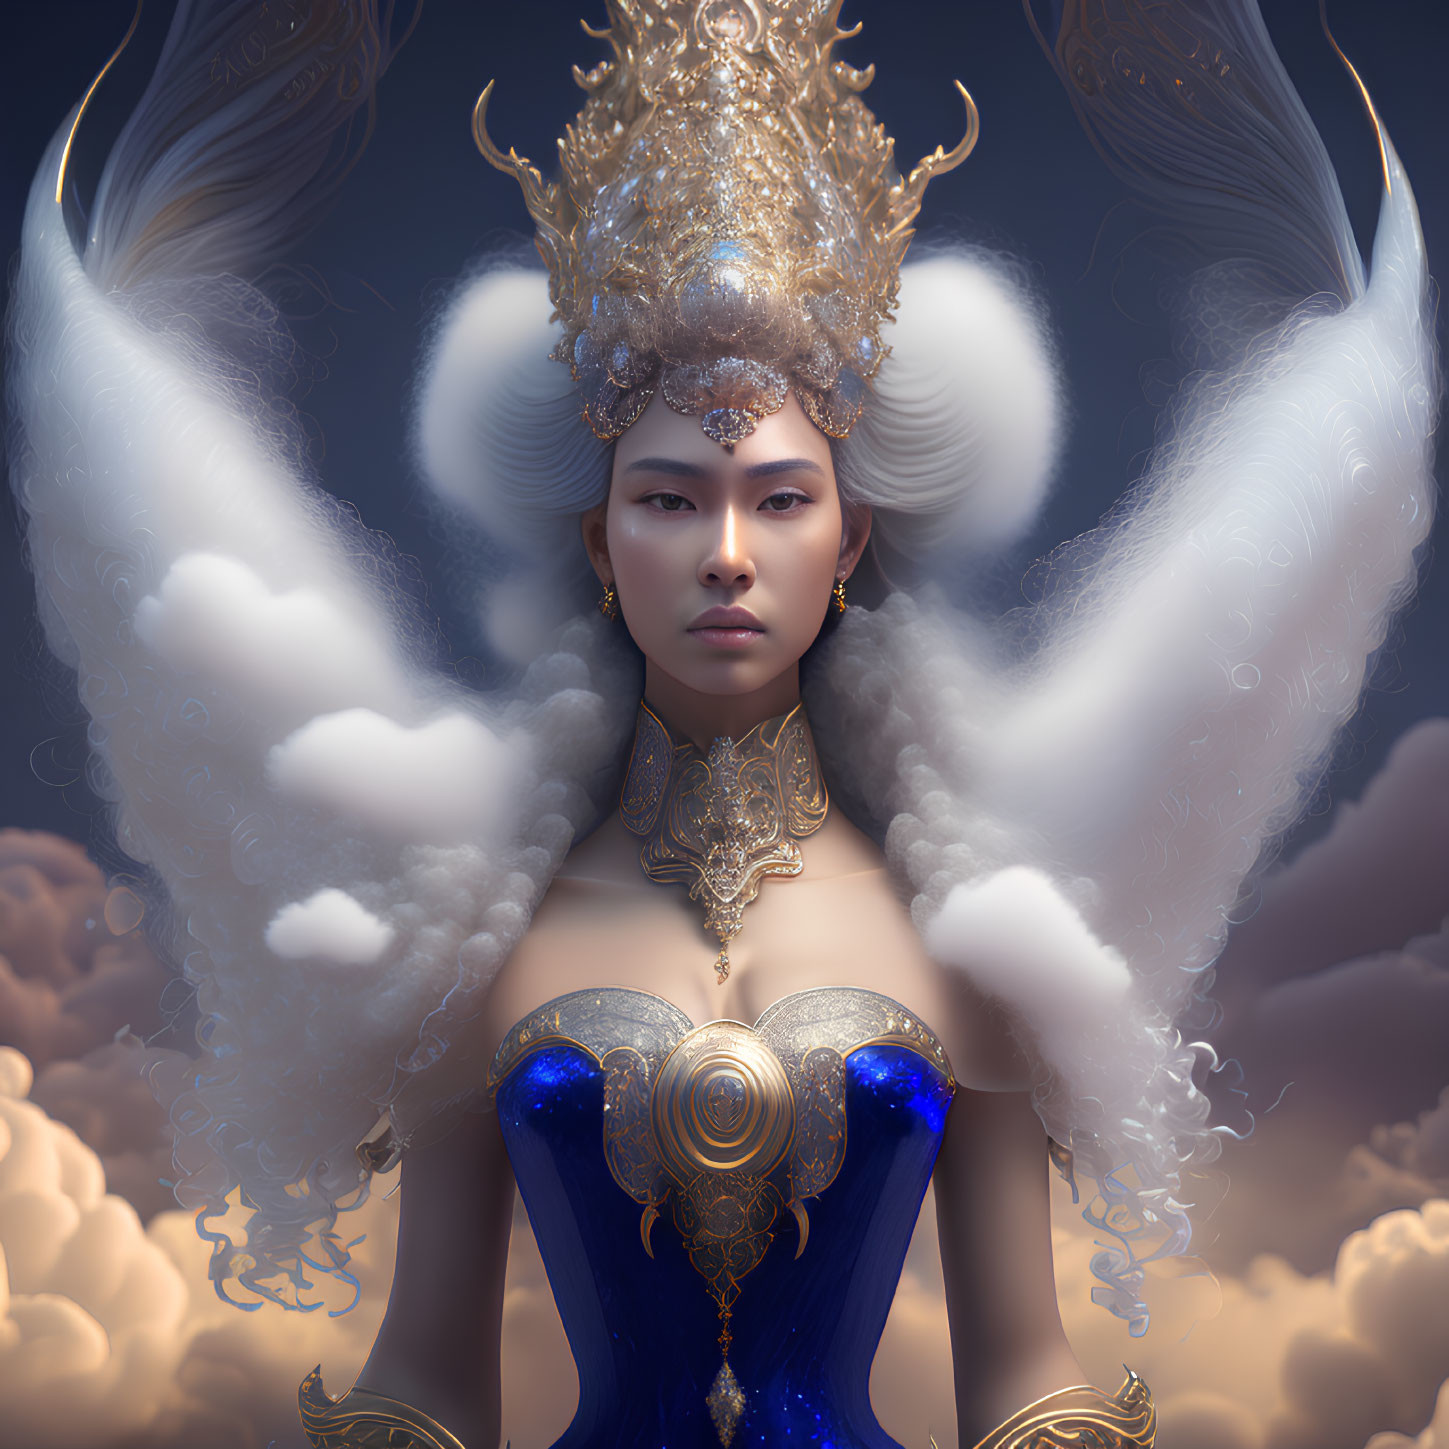 Mystical figure with golden headgear, piercing gaze, surrounded by clouds and wings